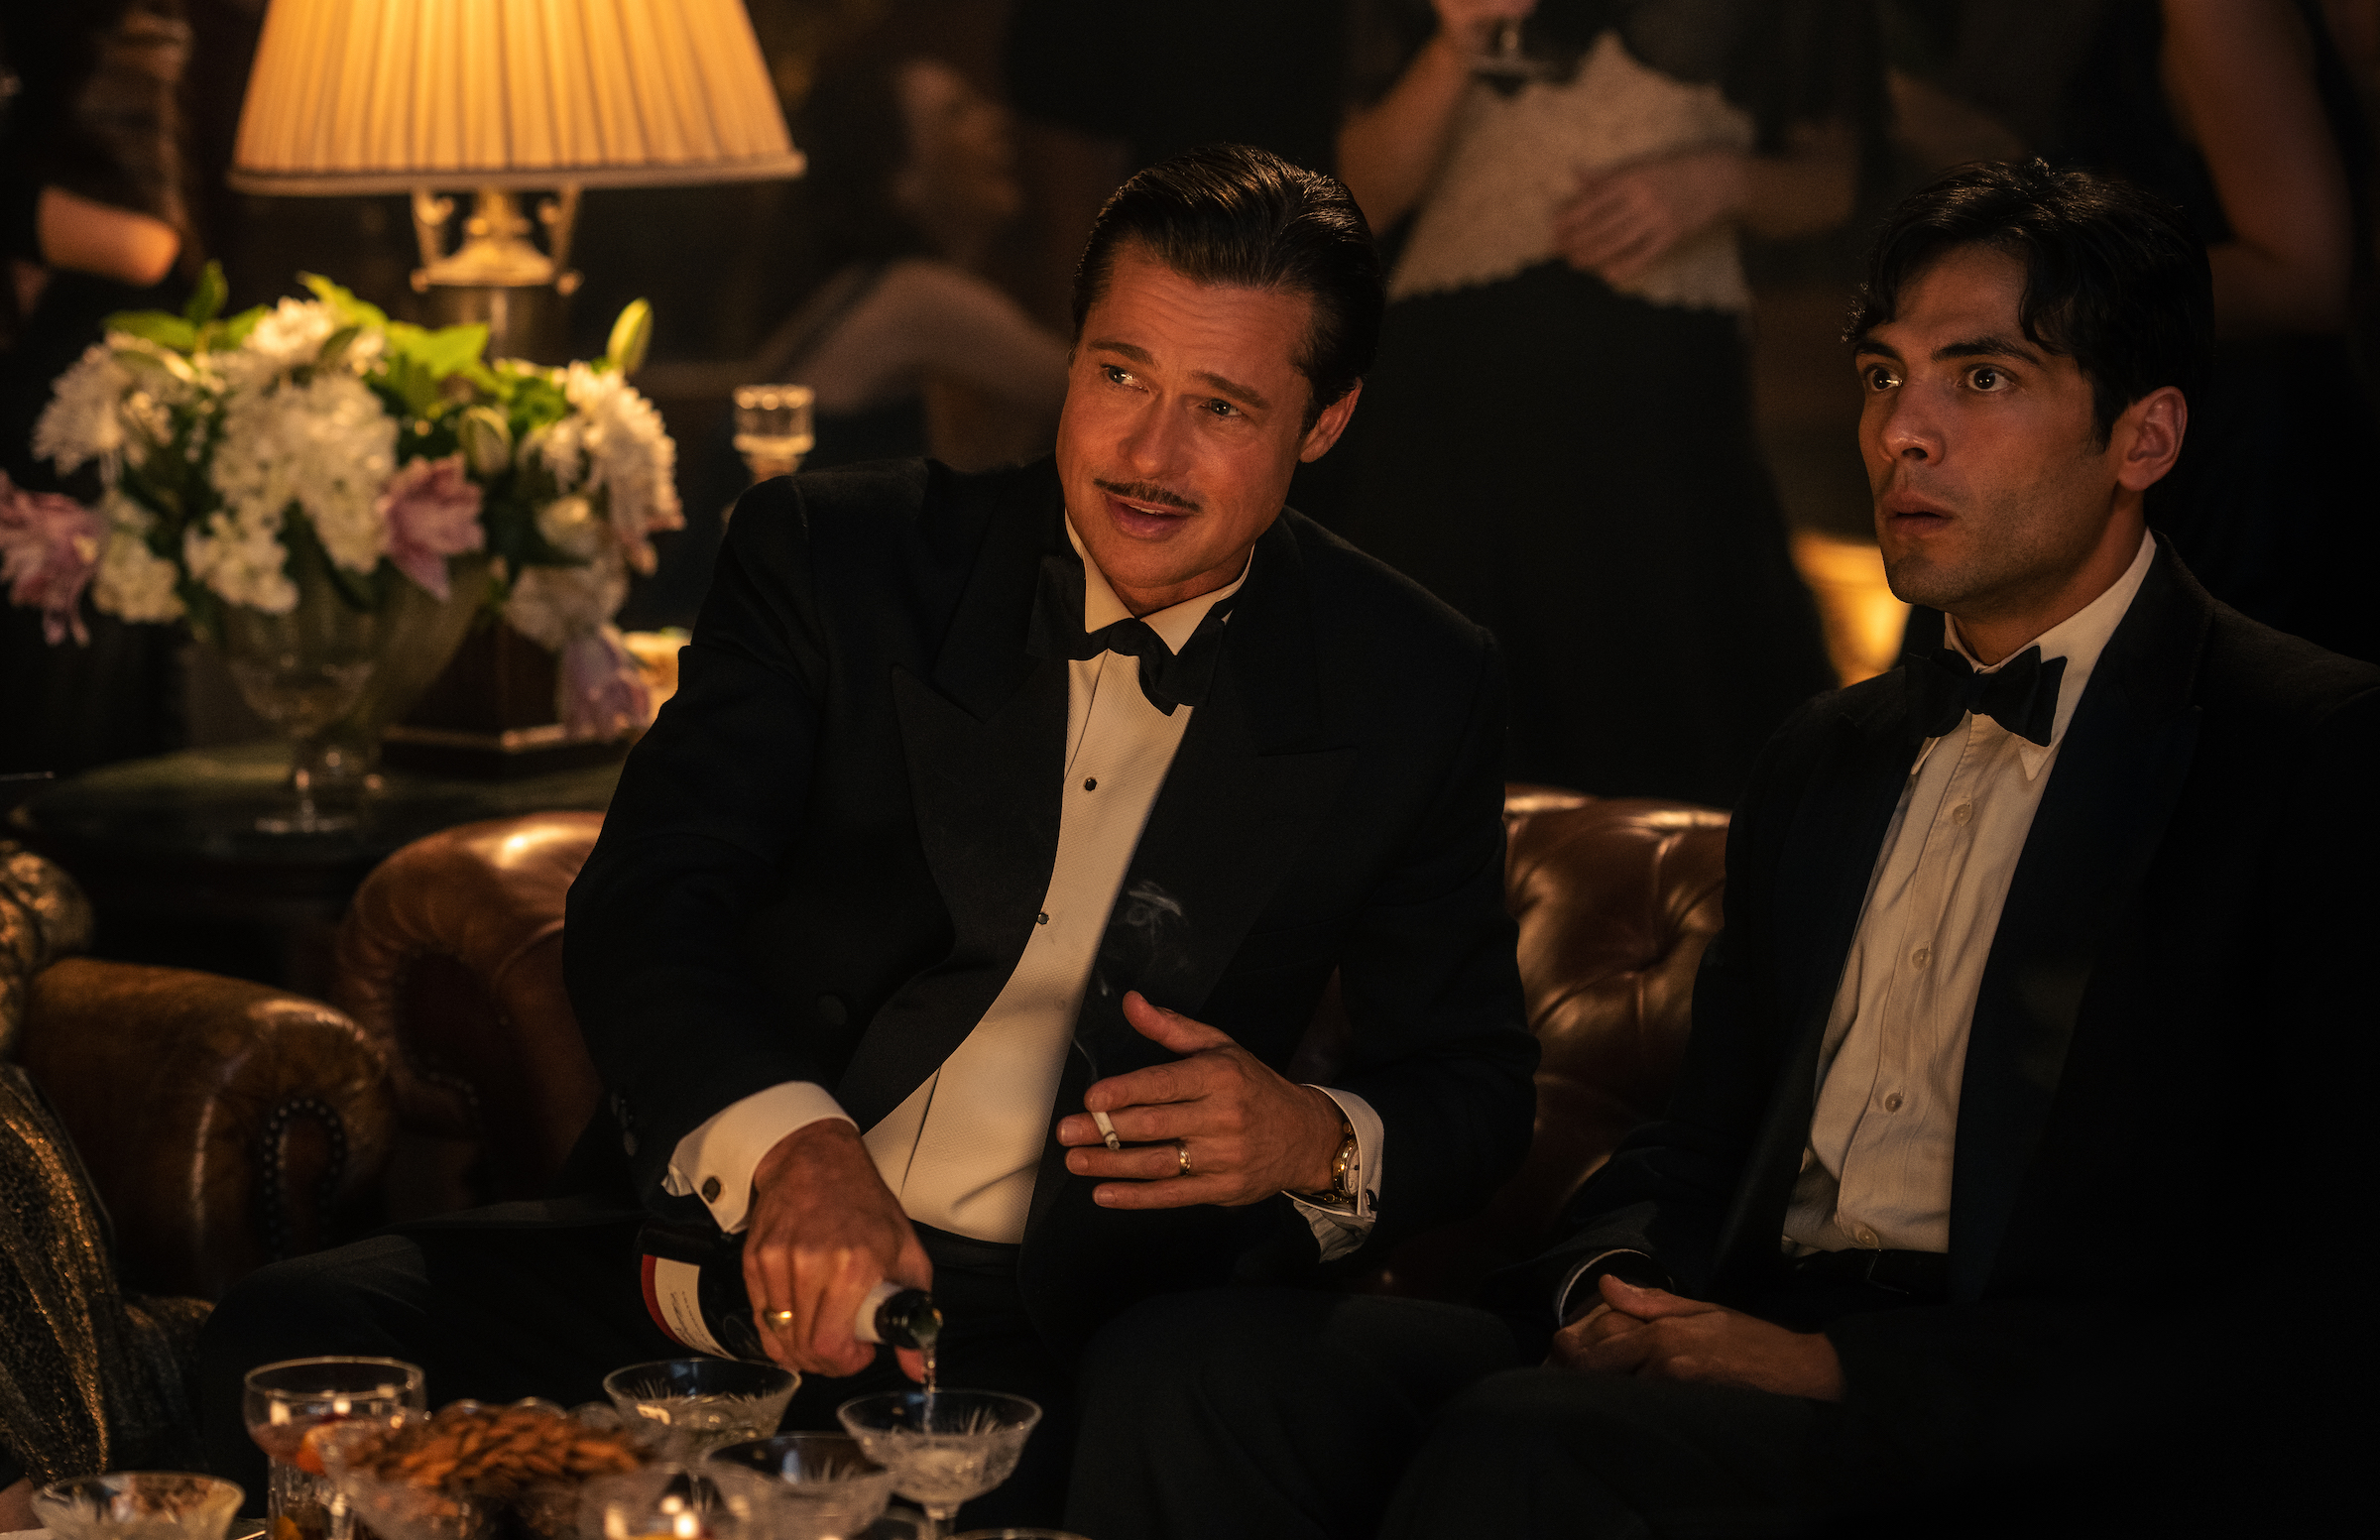 Brad Pitt as Jack Conrad and Diego Calva as Manny Torres (Courtesy of Paramount Pictures)